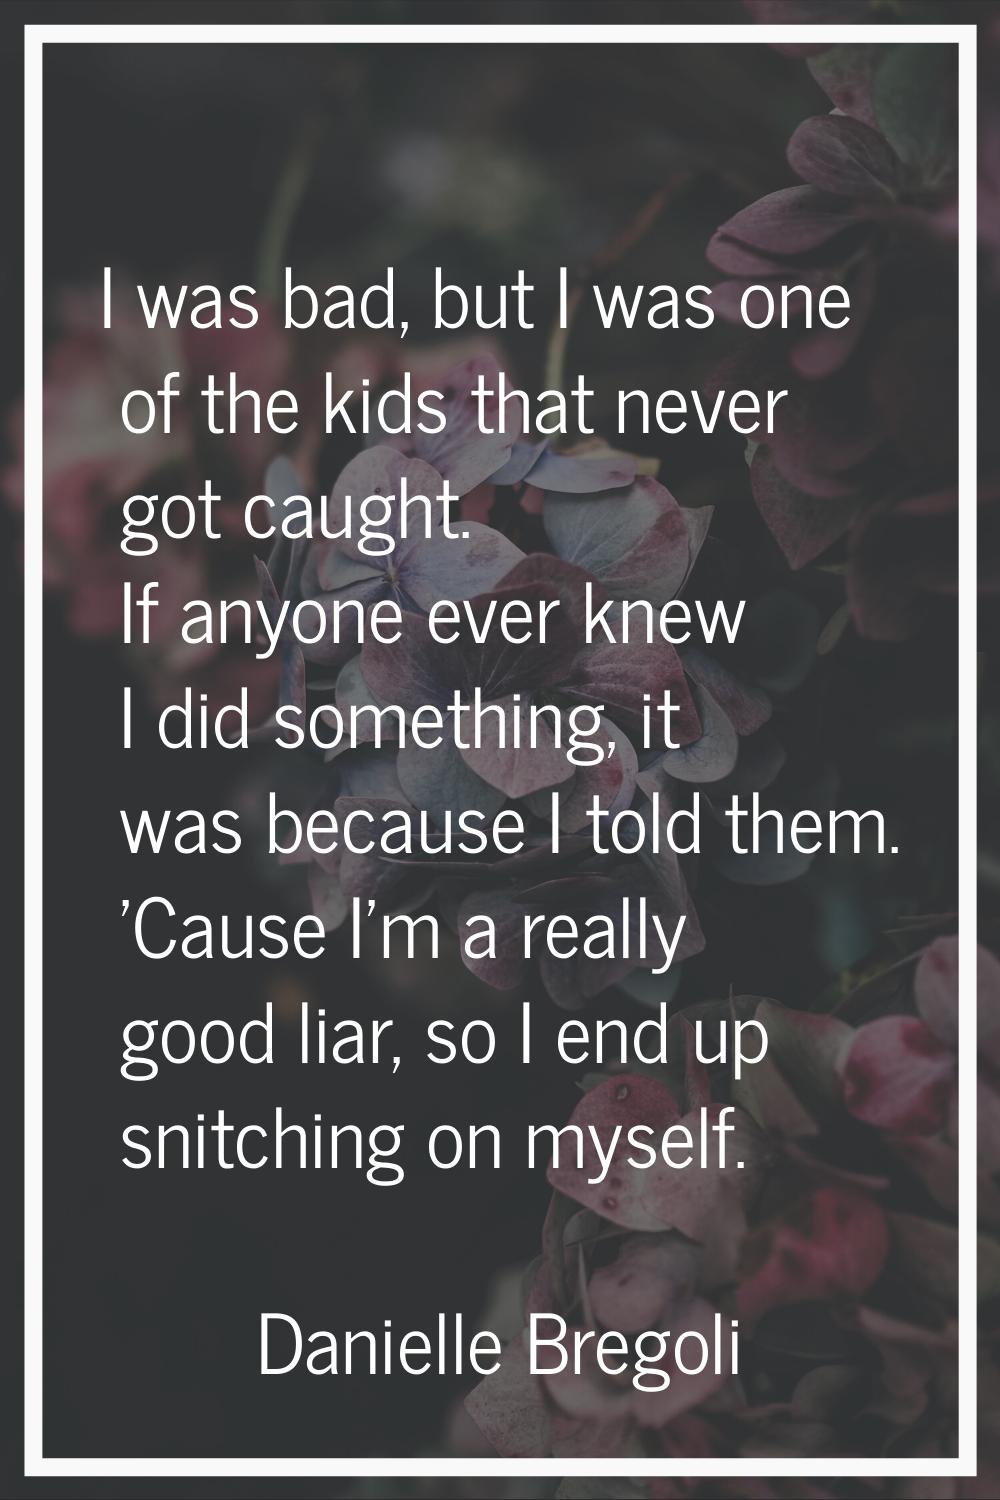 I was bad, but I was one of the kids that never got caught. If anyone ever knew I did something, it